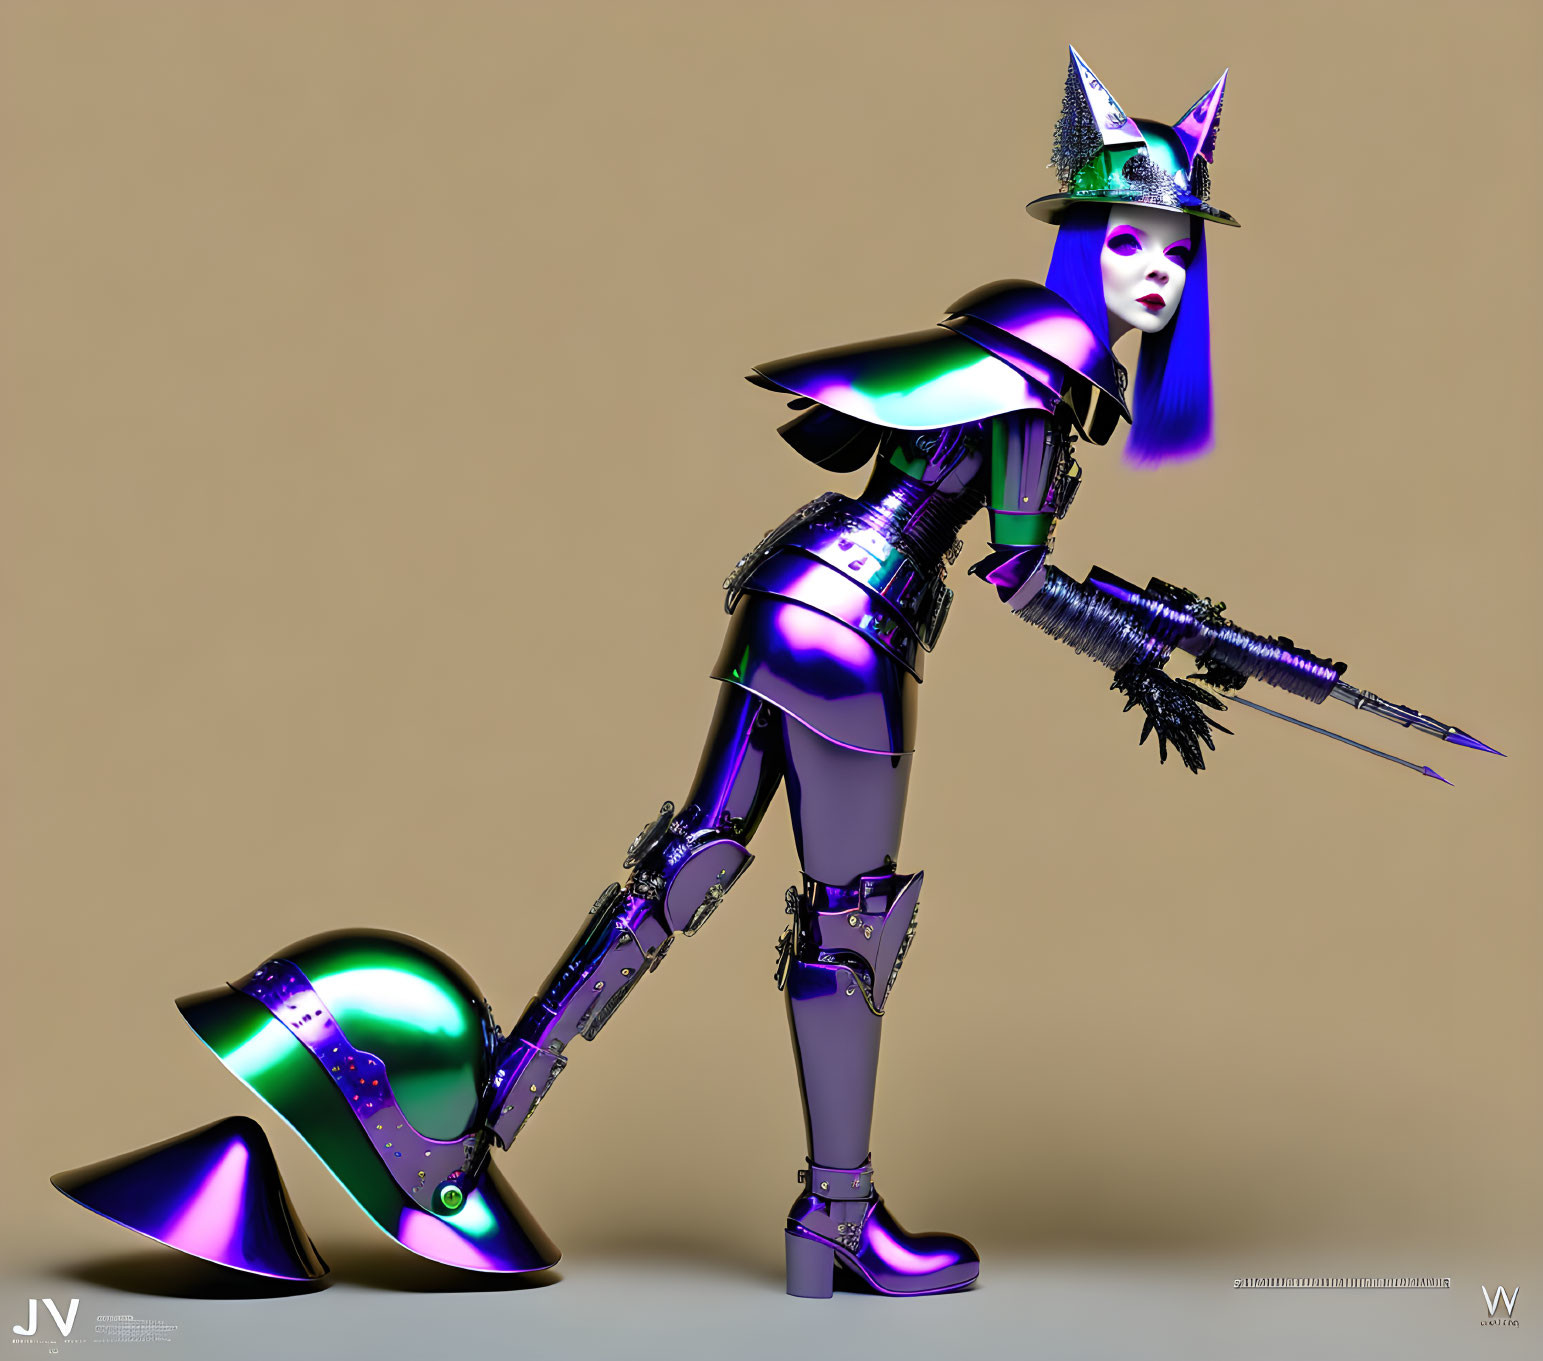 Purple-haired robotic witch in metallic attire with pointed hat and broom device on tan backdrop